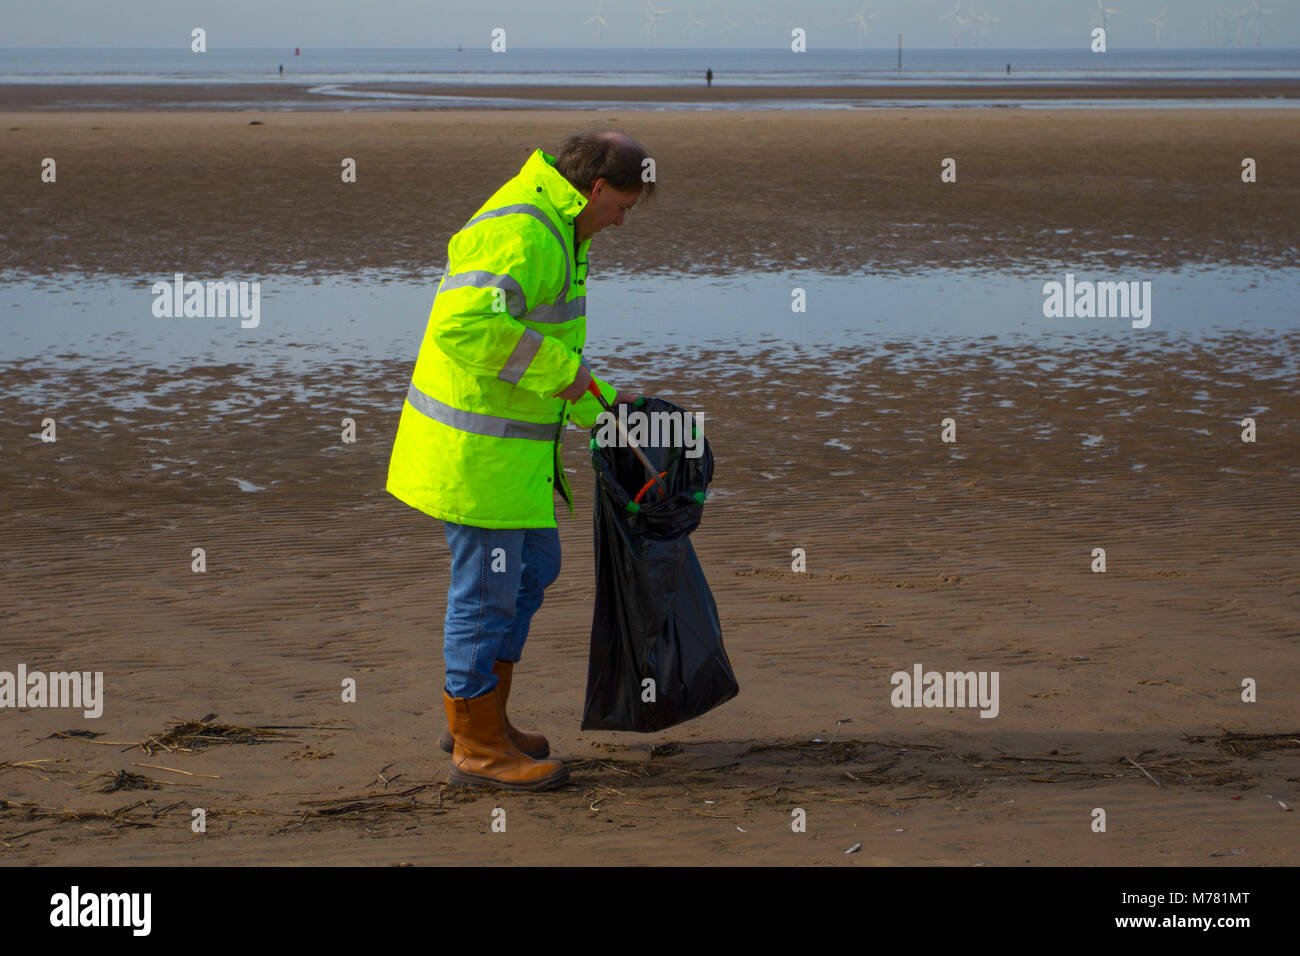 Crosby, Merseyside.  UK Weather. 9th March, 2018.  Network rail 'Social Responsibilty' volunteers beach cleaning at Mariners Way Beach. Employees are given five days' volunteer leave to help any UK registered charities of their choice or a community engagement activity. Squads of workers, who have to pay their own way to the resort, are employed to remove items washed up in the plastic tide brough to land by recent storms. Credit MediaWorldImages/AlamyLiveNews. Stock Photo